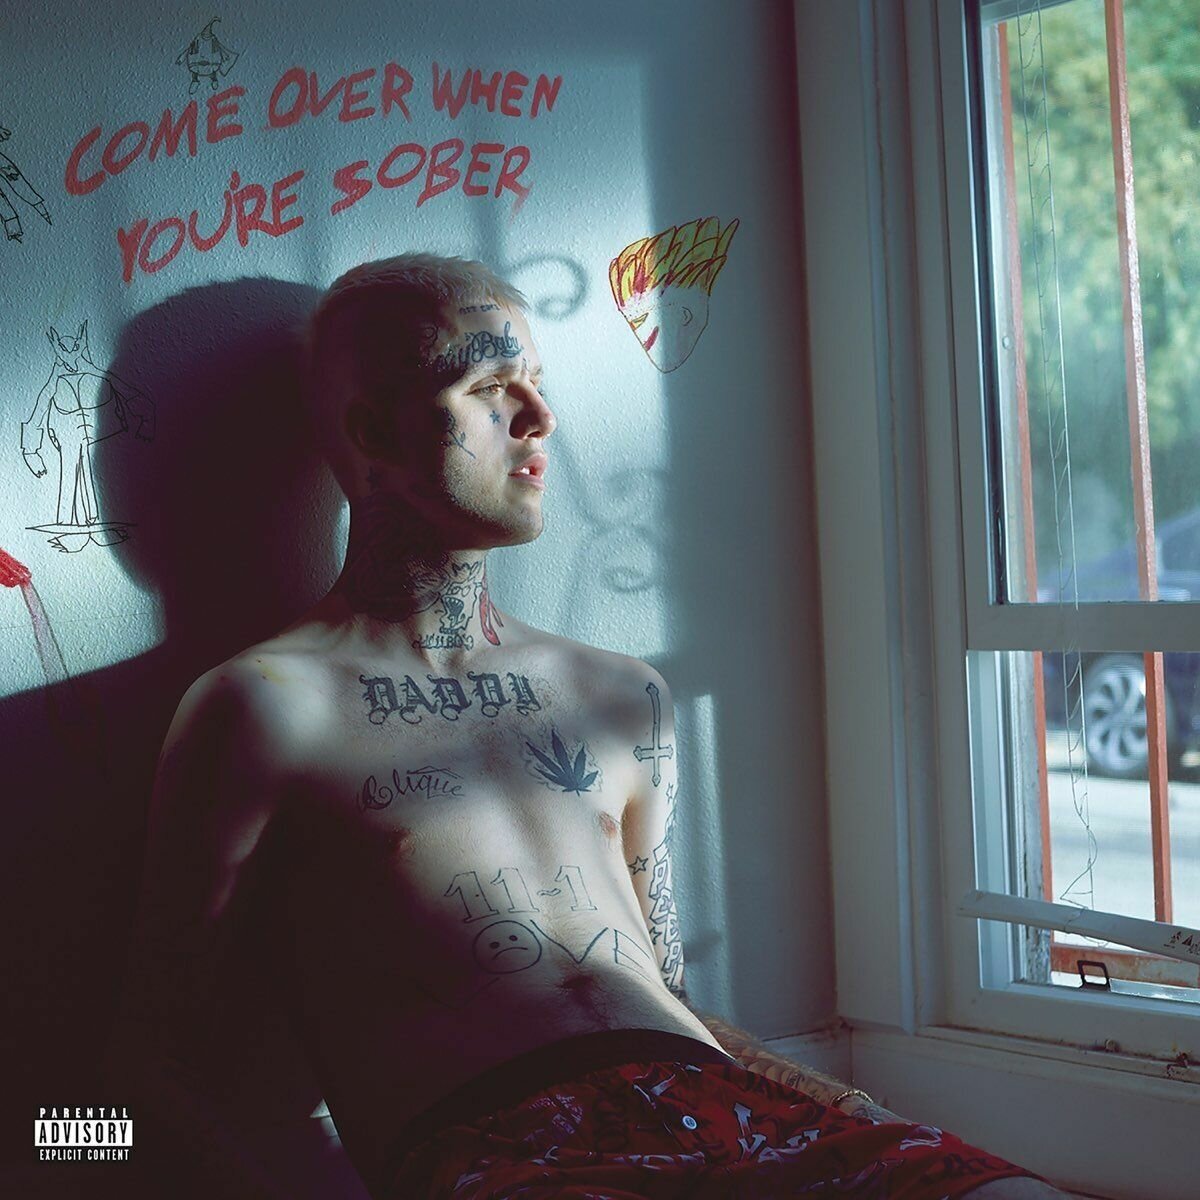 Винил 12" (LP), Limited Edition, Coloured Lil Peep Come Over When You'Re Sober Pt.1 & Pt.2